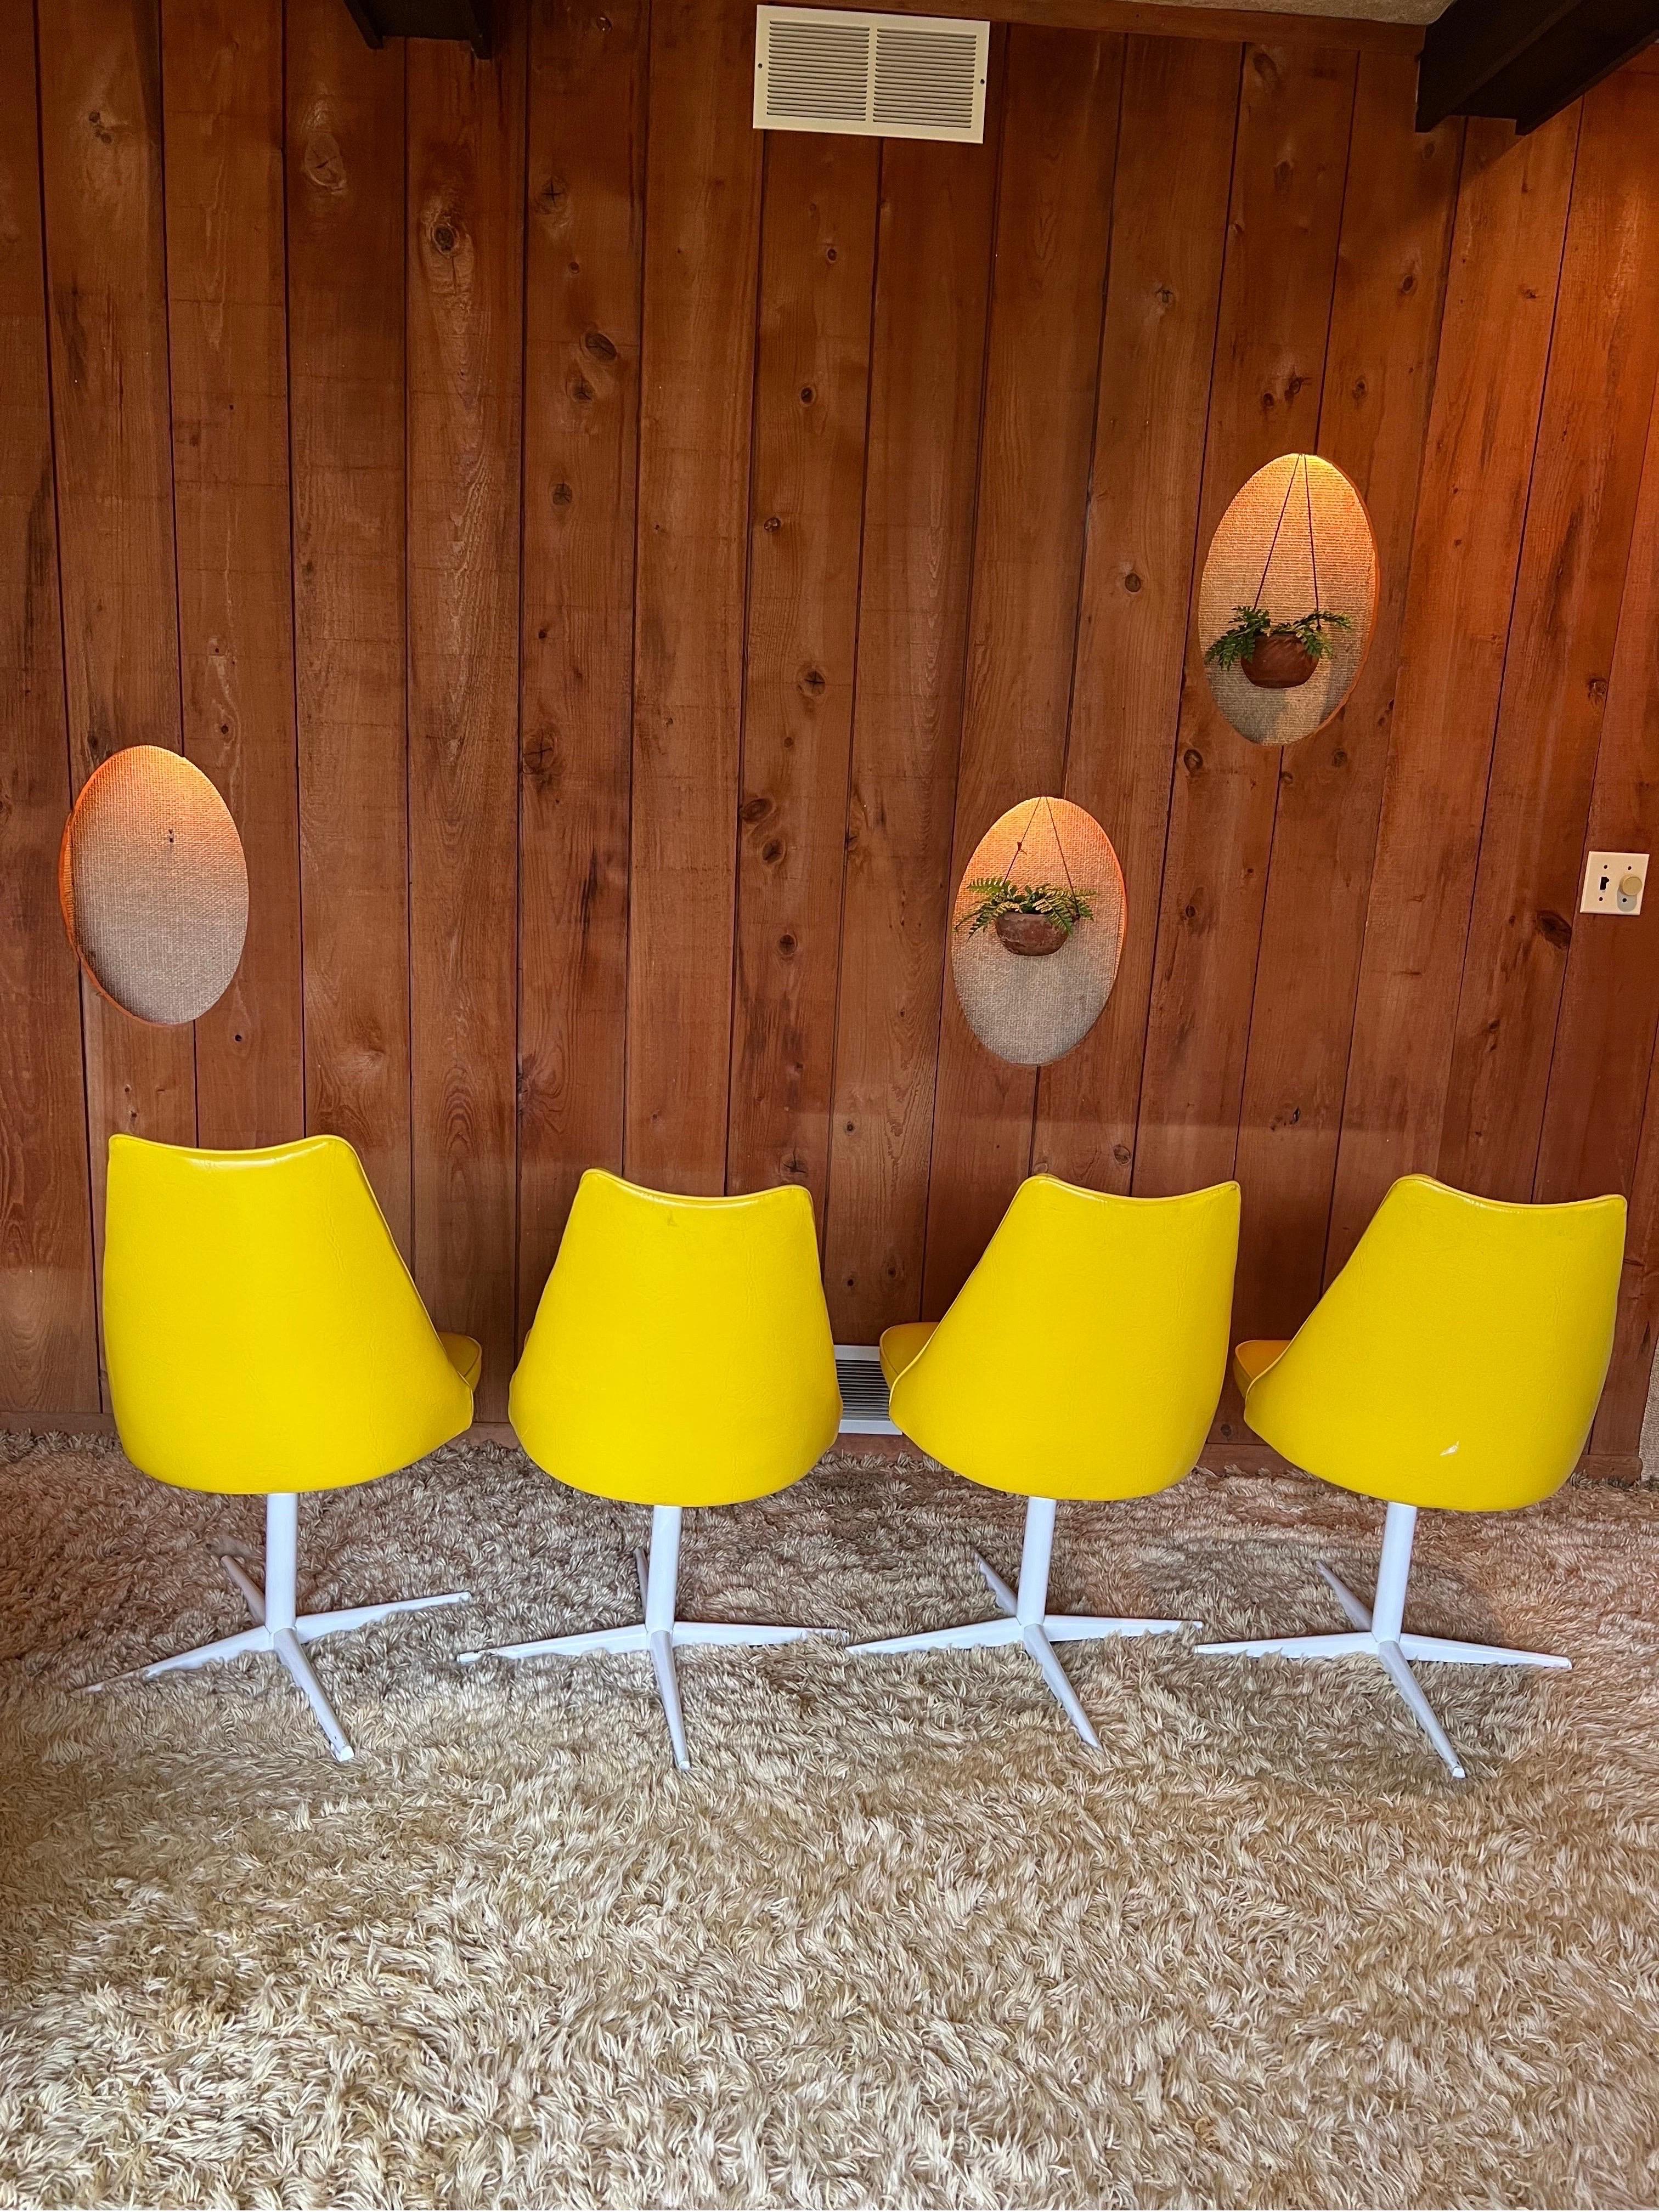 1970s yellow Vinyl dining chairs set of 4. From a 1972 home where everything is well maintained by the original owner.